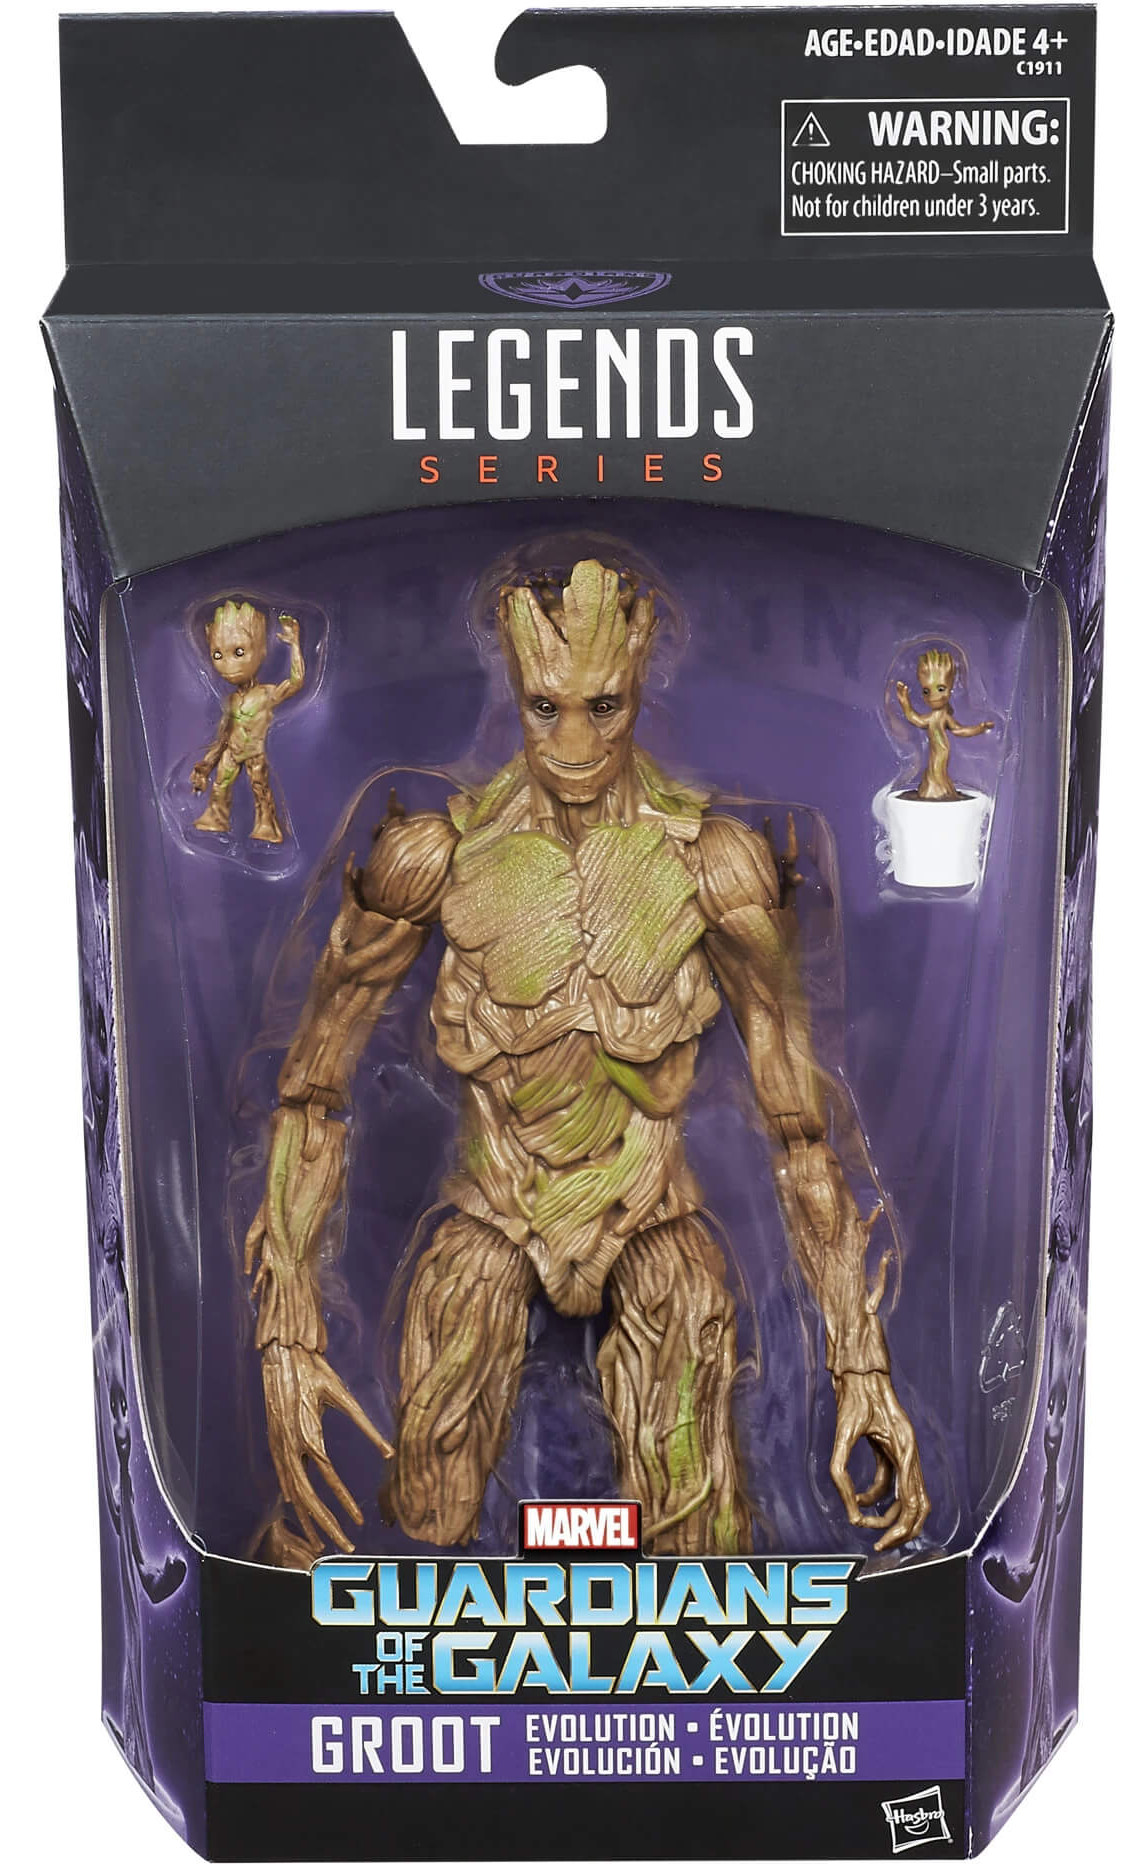 Marvel Legends Guardians of the Galaxy Groot Evolution